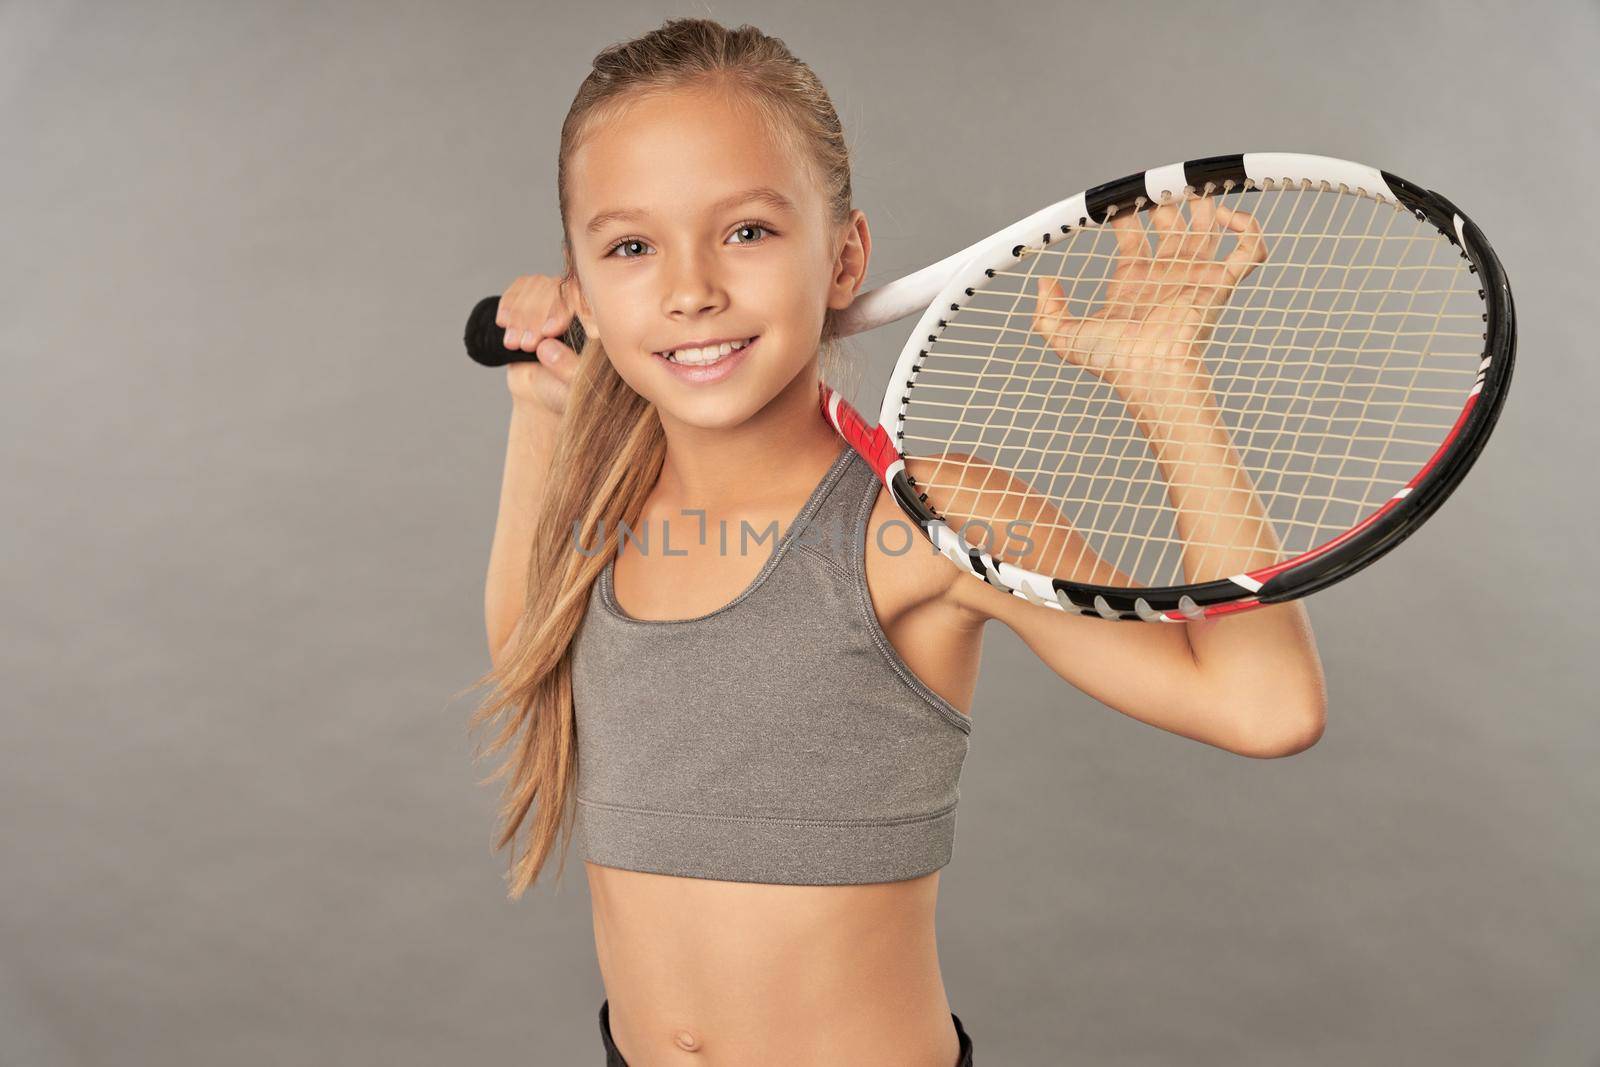 Cute girl with tennis racket standing against gray background by friendsstock